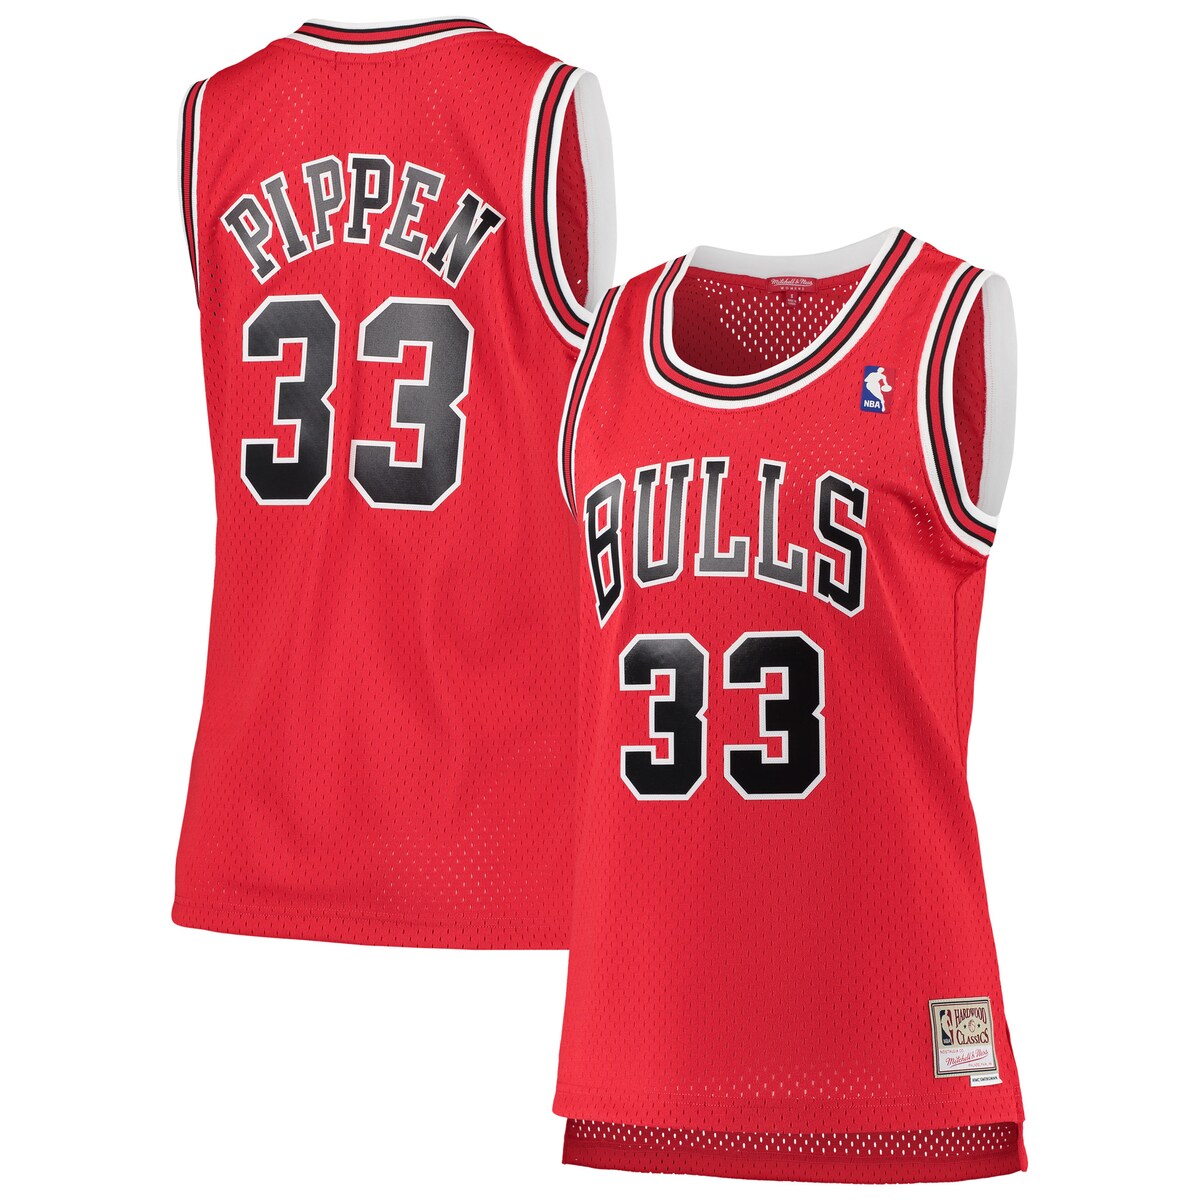 No other athlete compares to the level of respect you have for Scottie Pippen. Now, showcase your pride for your all-time favorite basketball player with his very own Chicago Bulls Hardwood Classics swingman jersey. This Mitchell & Ness jersey puts an exciting twist on your team's usual look, complete with throwback graphics from the 1997-98 season.Material: 100% PolyesterImportedOfficially licensedNike SwingmanBrand: Mitchell & NessTackle twill graphicsSplit hem with droptailWoven jock tagMachine wash, line dryCrew neck